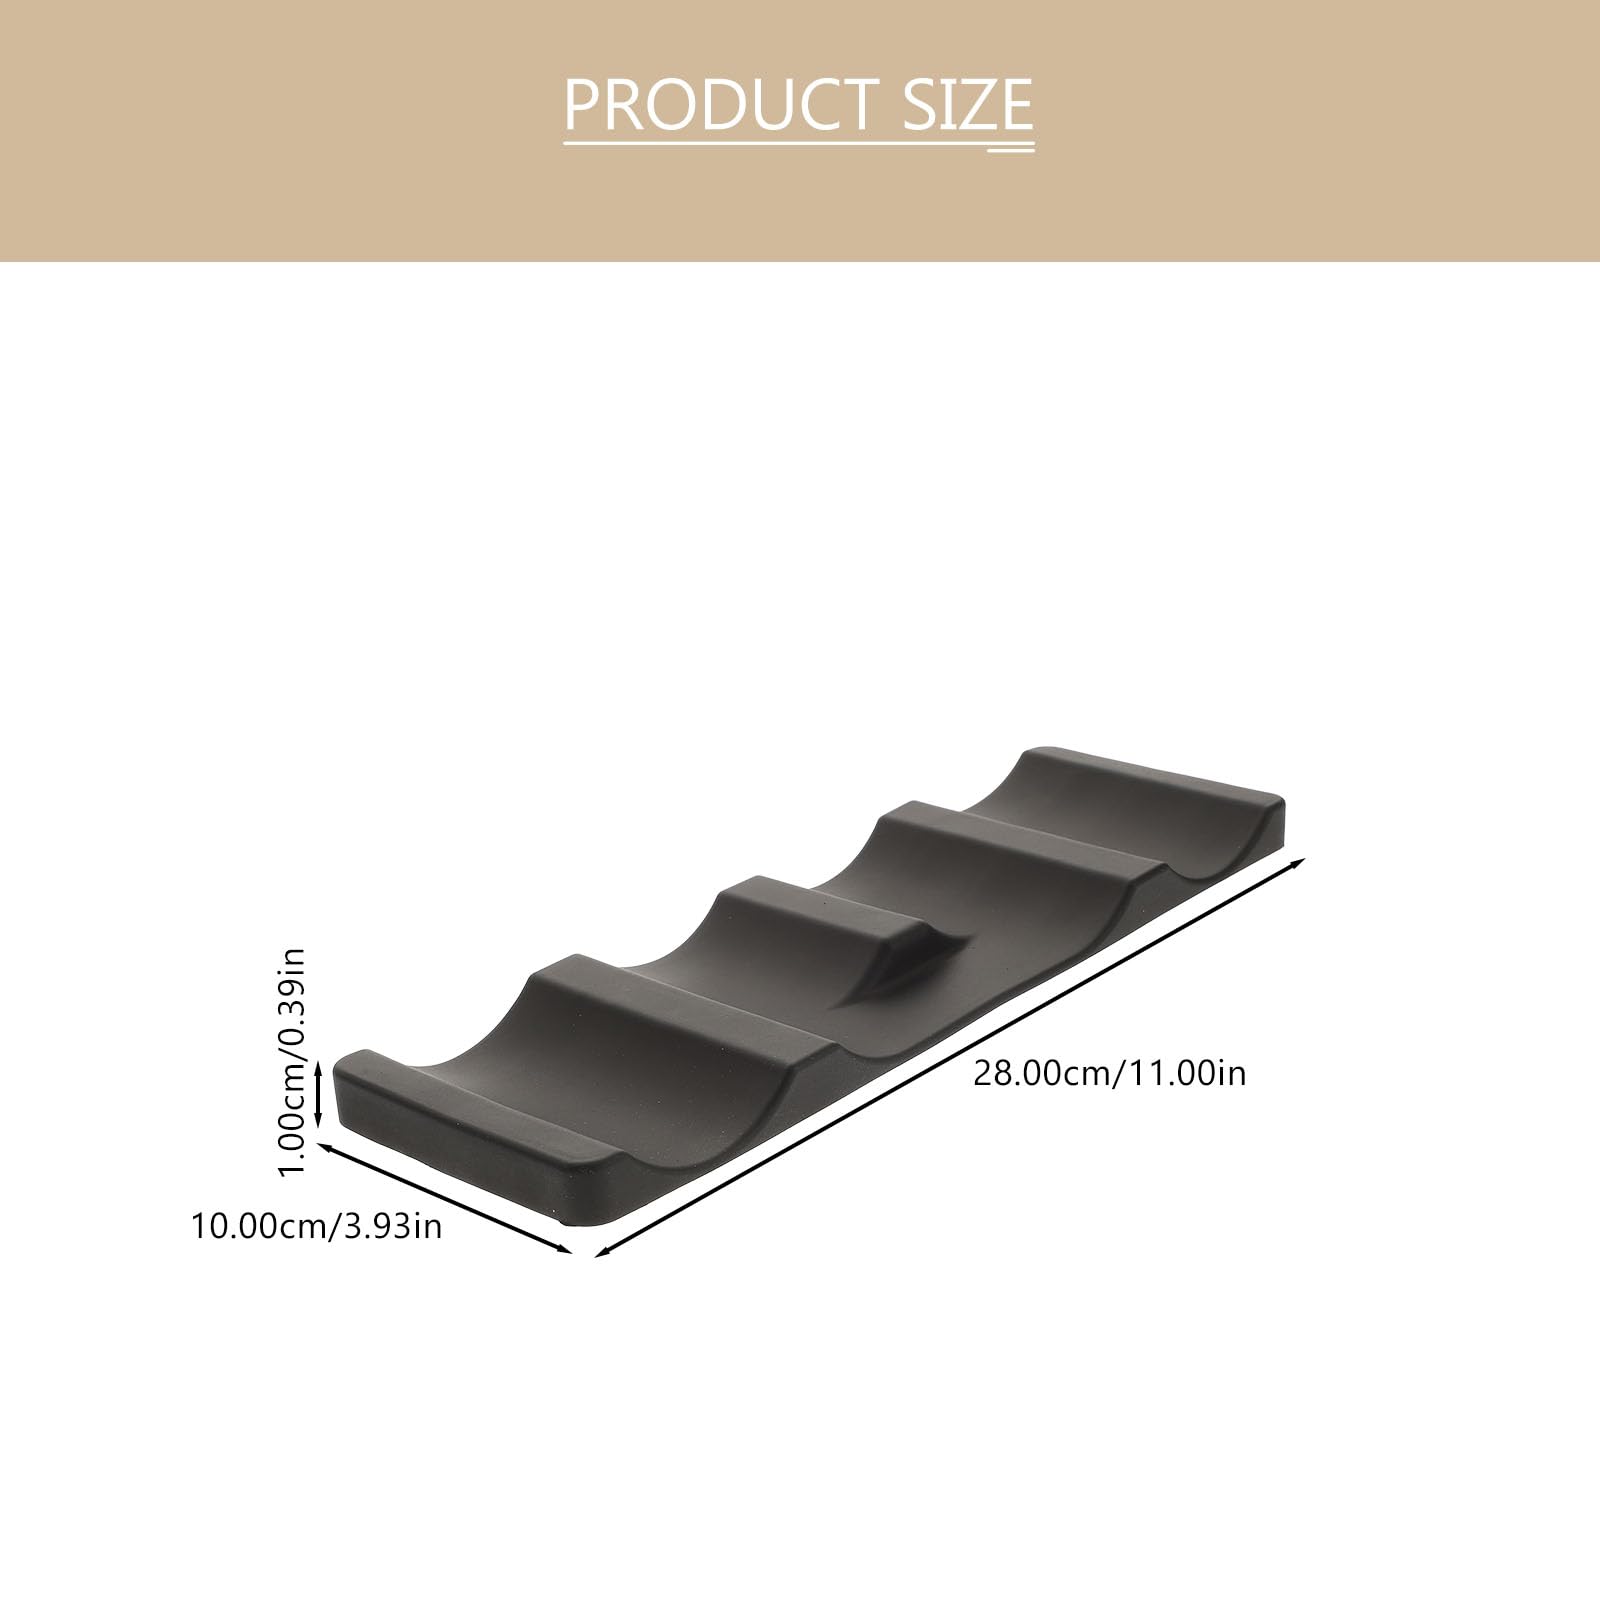 Silicone Can Mat Refrigerator Organizer: Beverage Refrigerator Wine Stacking Mat Foldable Silicone Wine Stacker Bottle Can Stacker Can Holder Rack for Refrigerator Pantry Countertop Cabinets